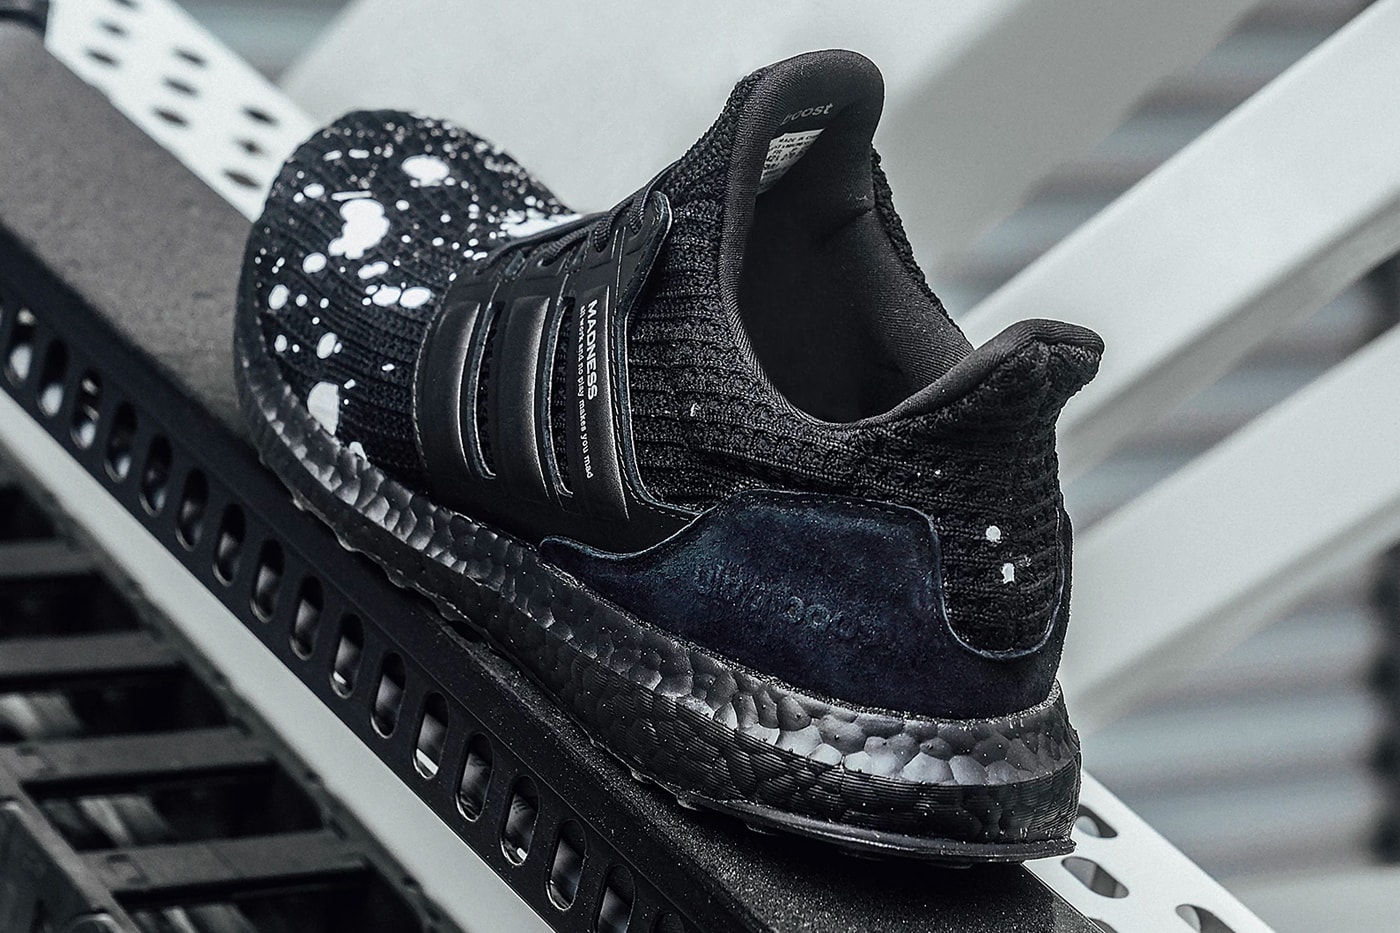 MADNESS x adidas UltraBOOST 4.0 Release Date